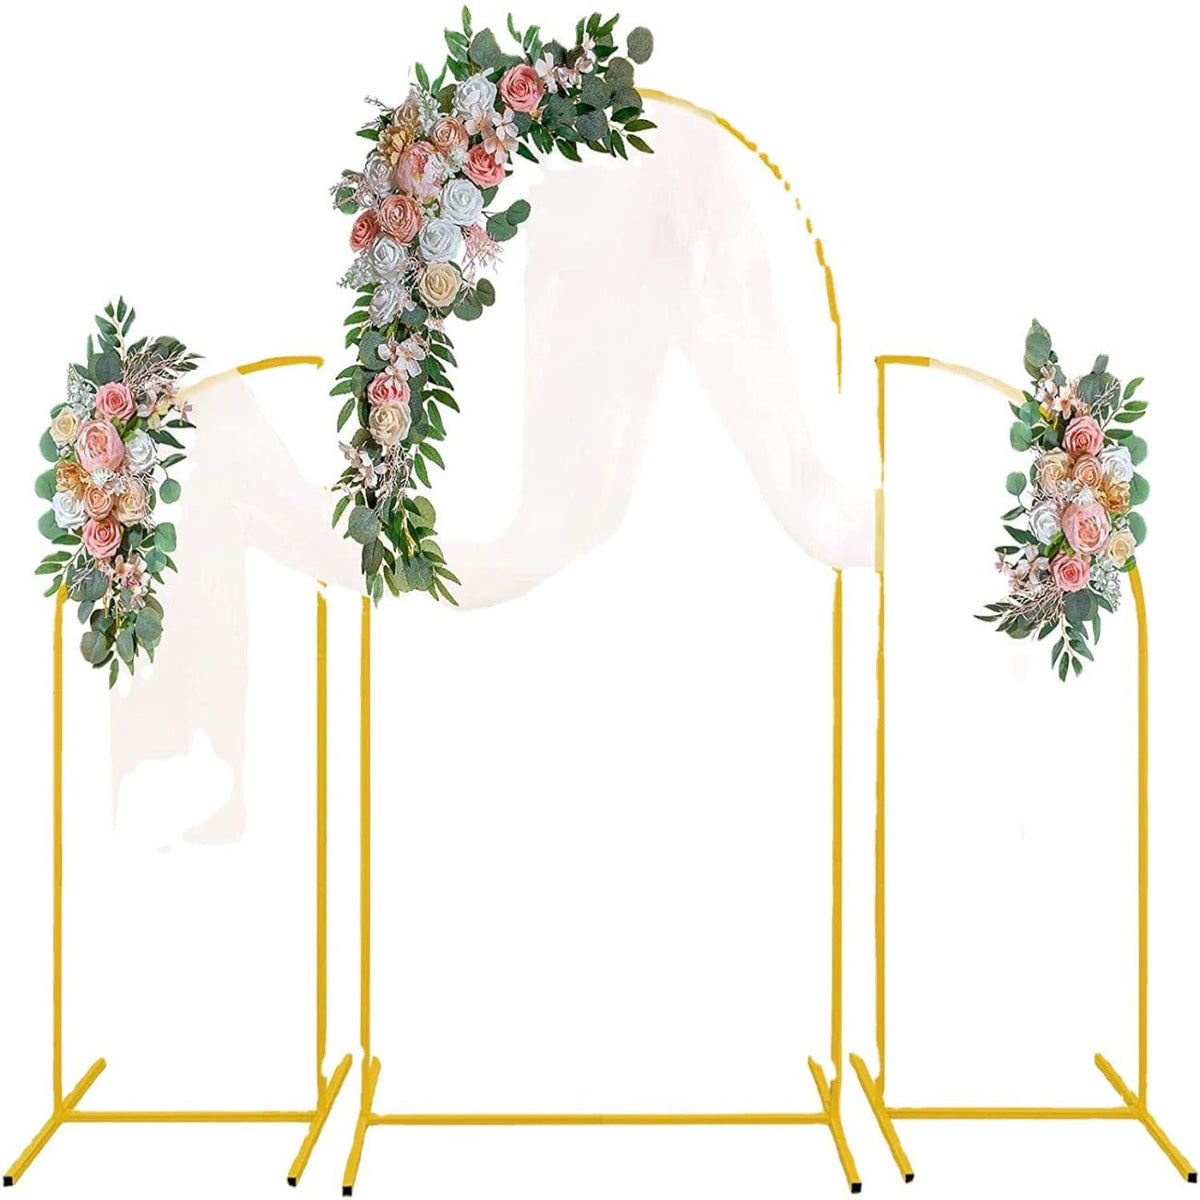 Iron Party Stand Flower Stand Wedding Arch Party Birthday Backdrop HJ9116